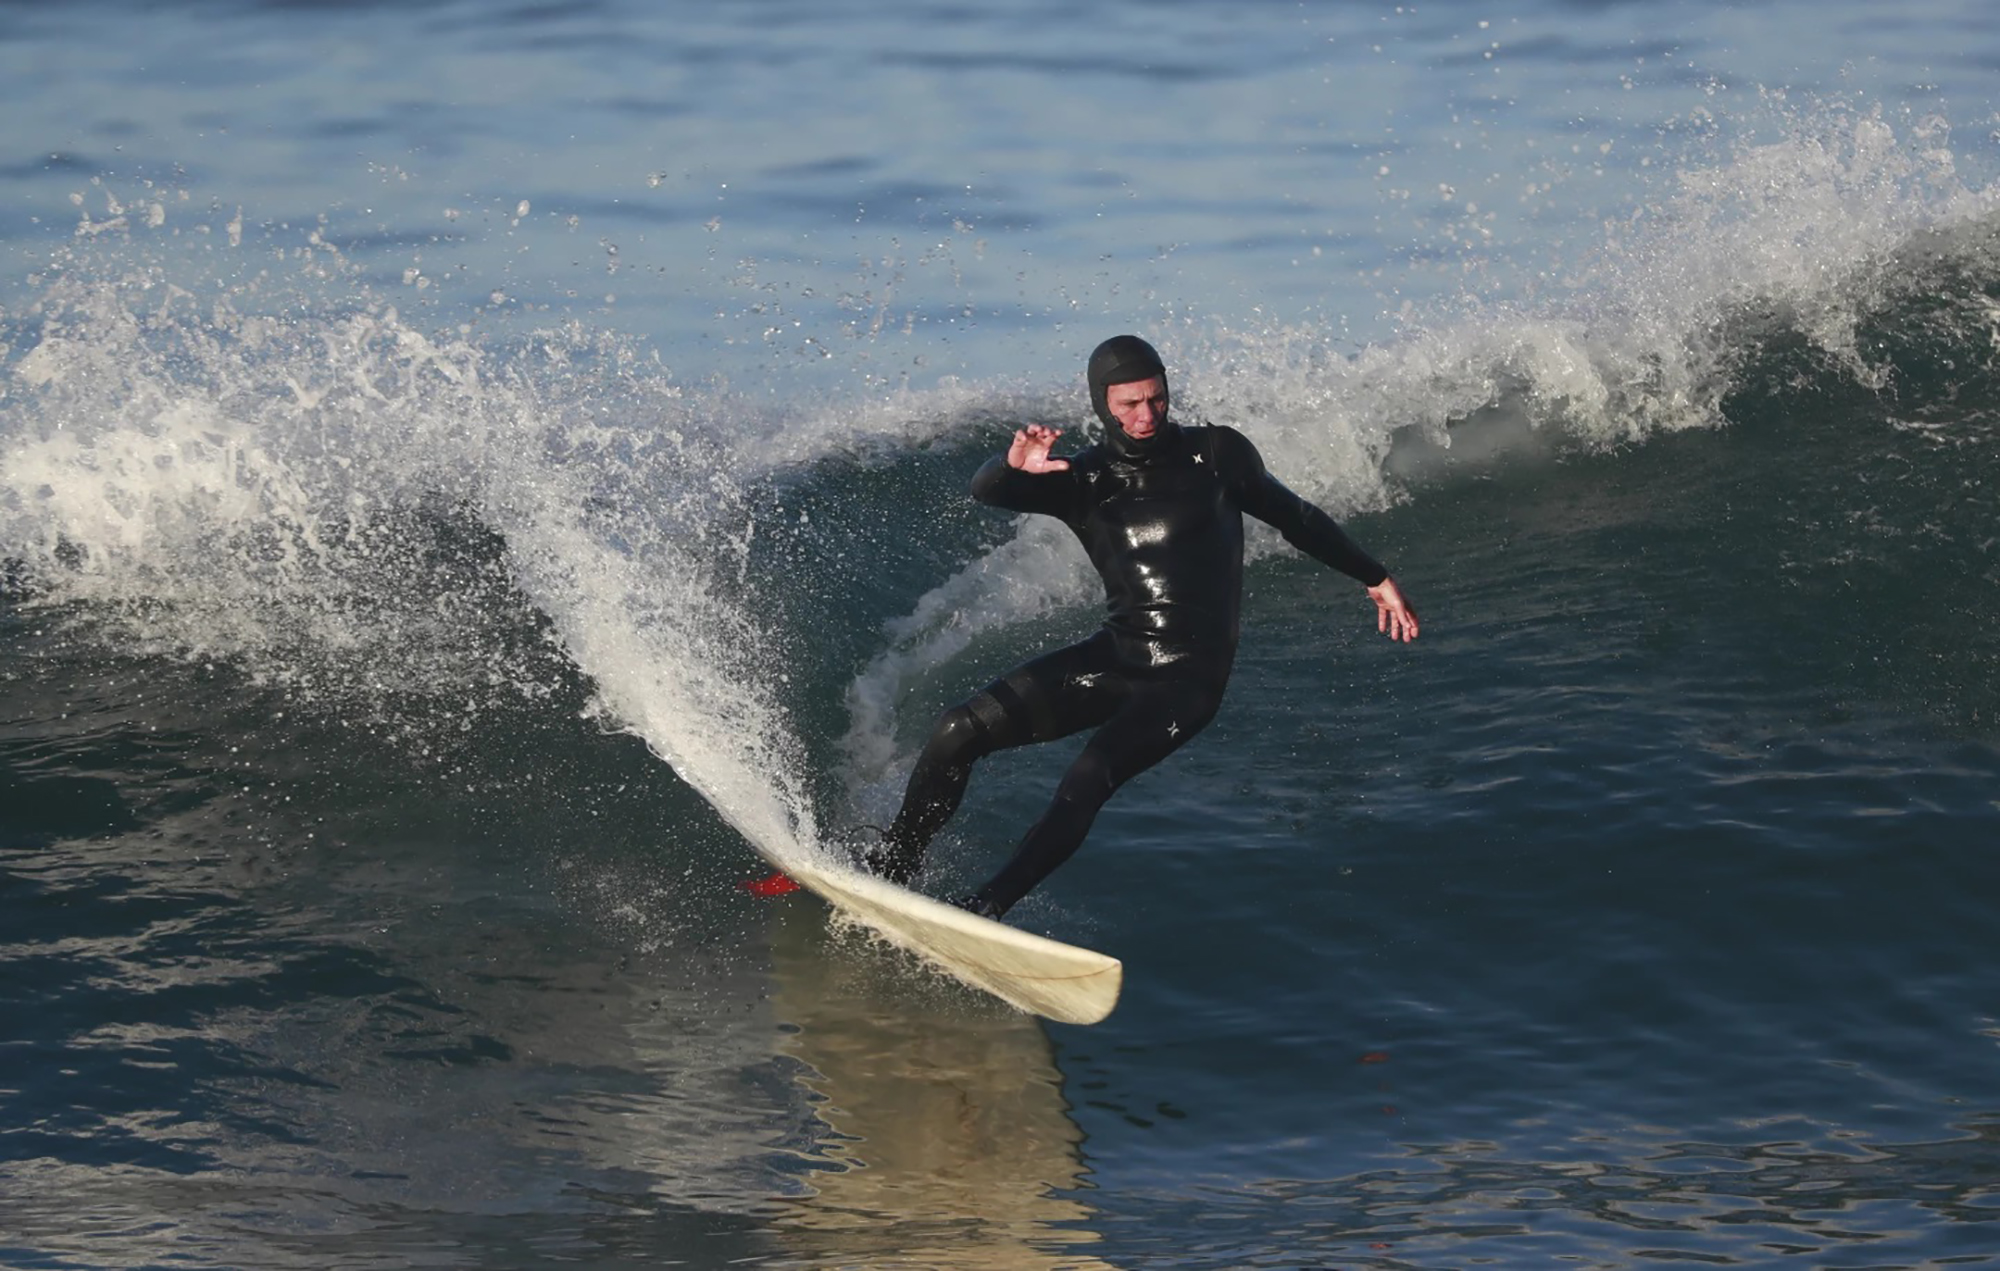 A man wearing a black wet suit surfs on a white surfboard.